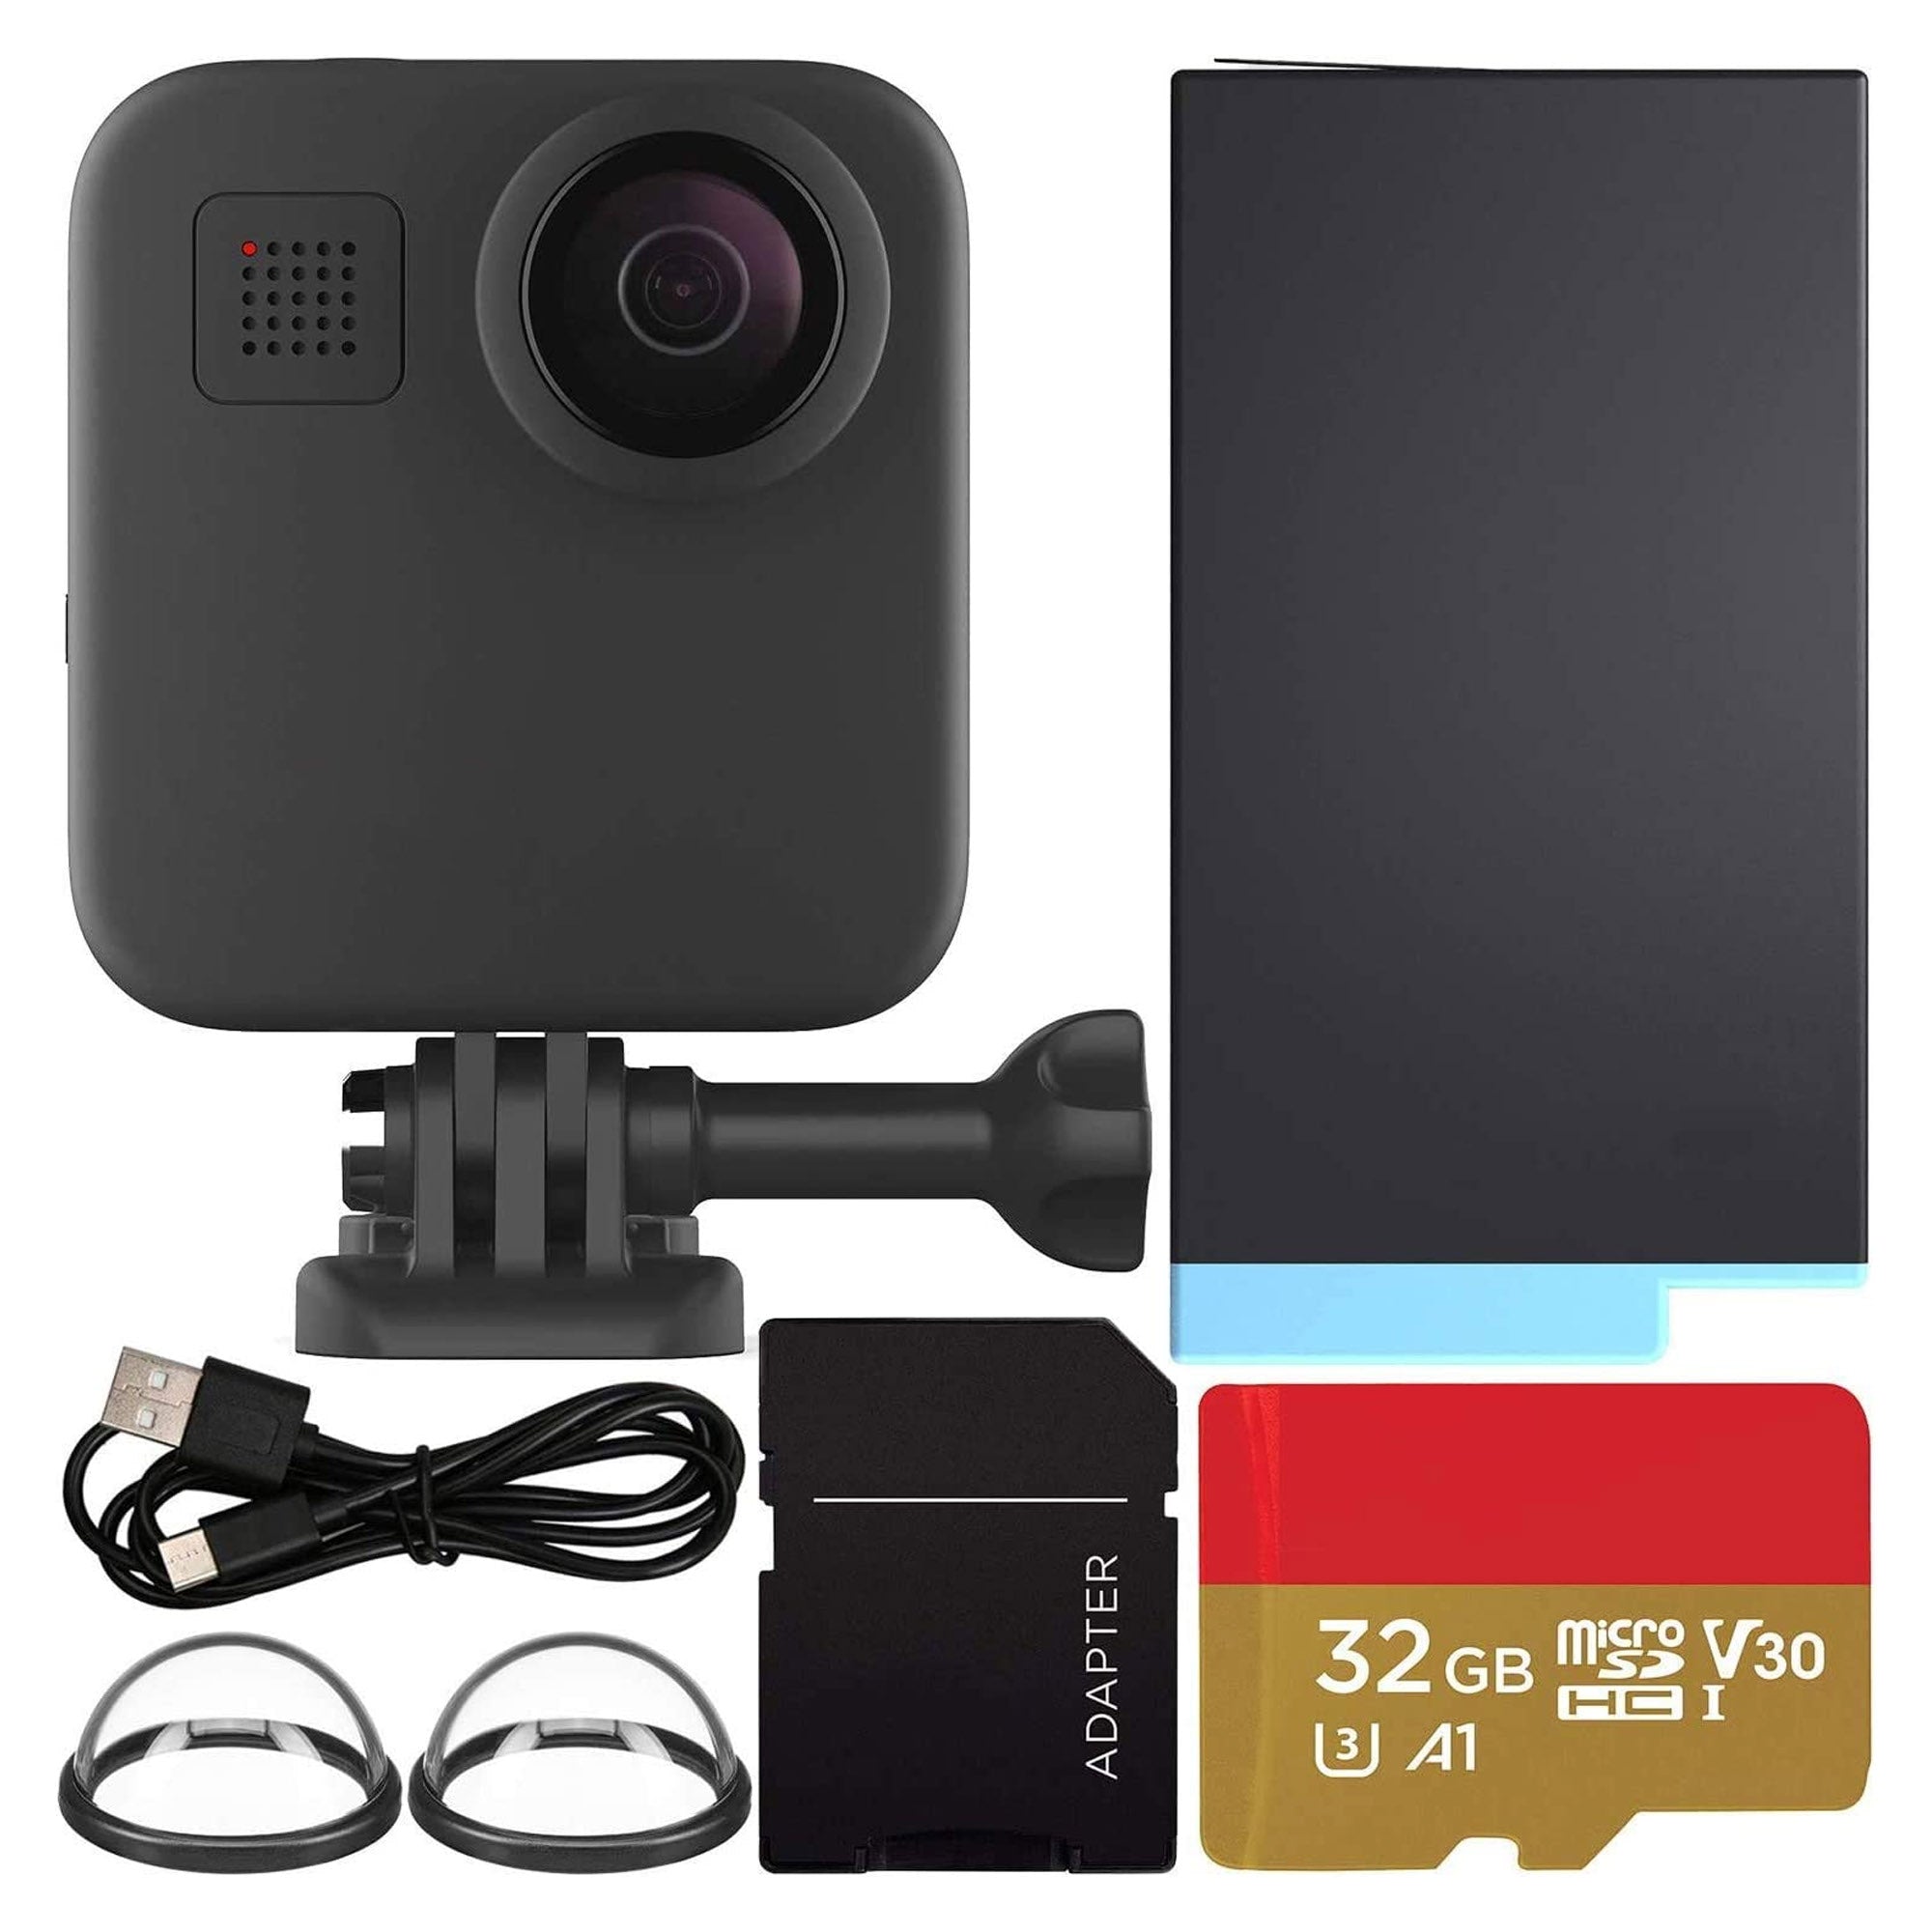 GoPro MAX 360 Action Camera with SanDisk Extreme 32GB microSDHC Memory Card